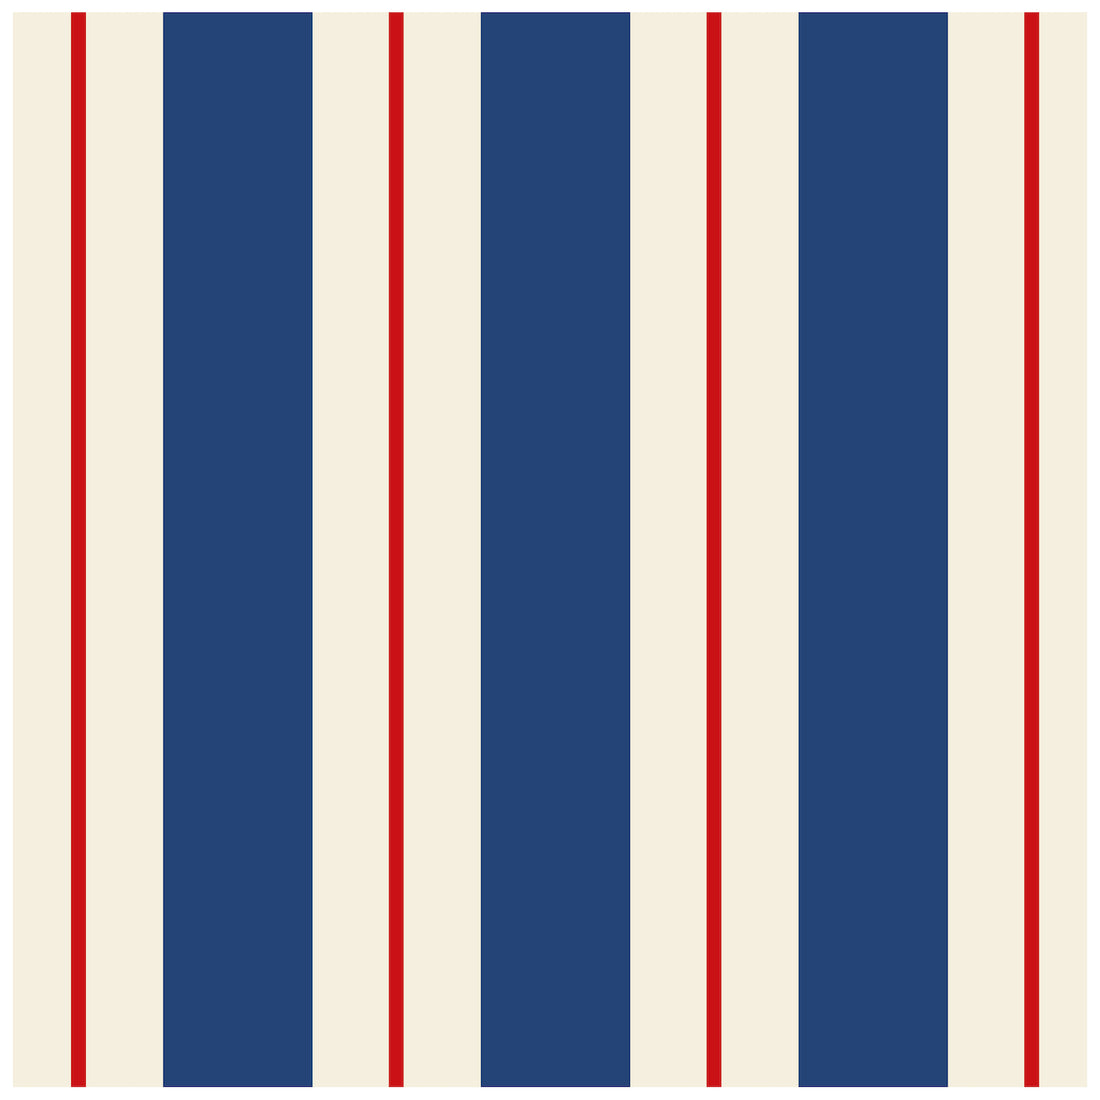 A square cocktail napkin featuring vertical navy and white stripes, with a red line running down the center of each white stripe.